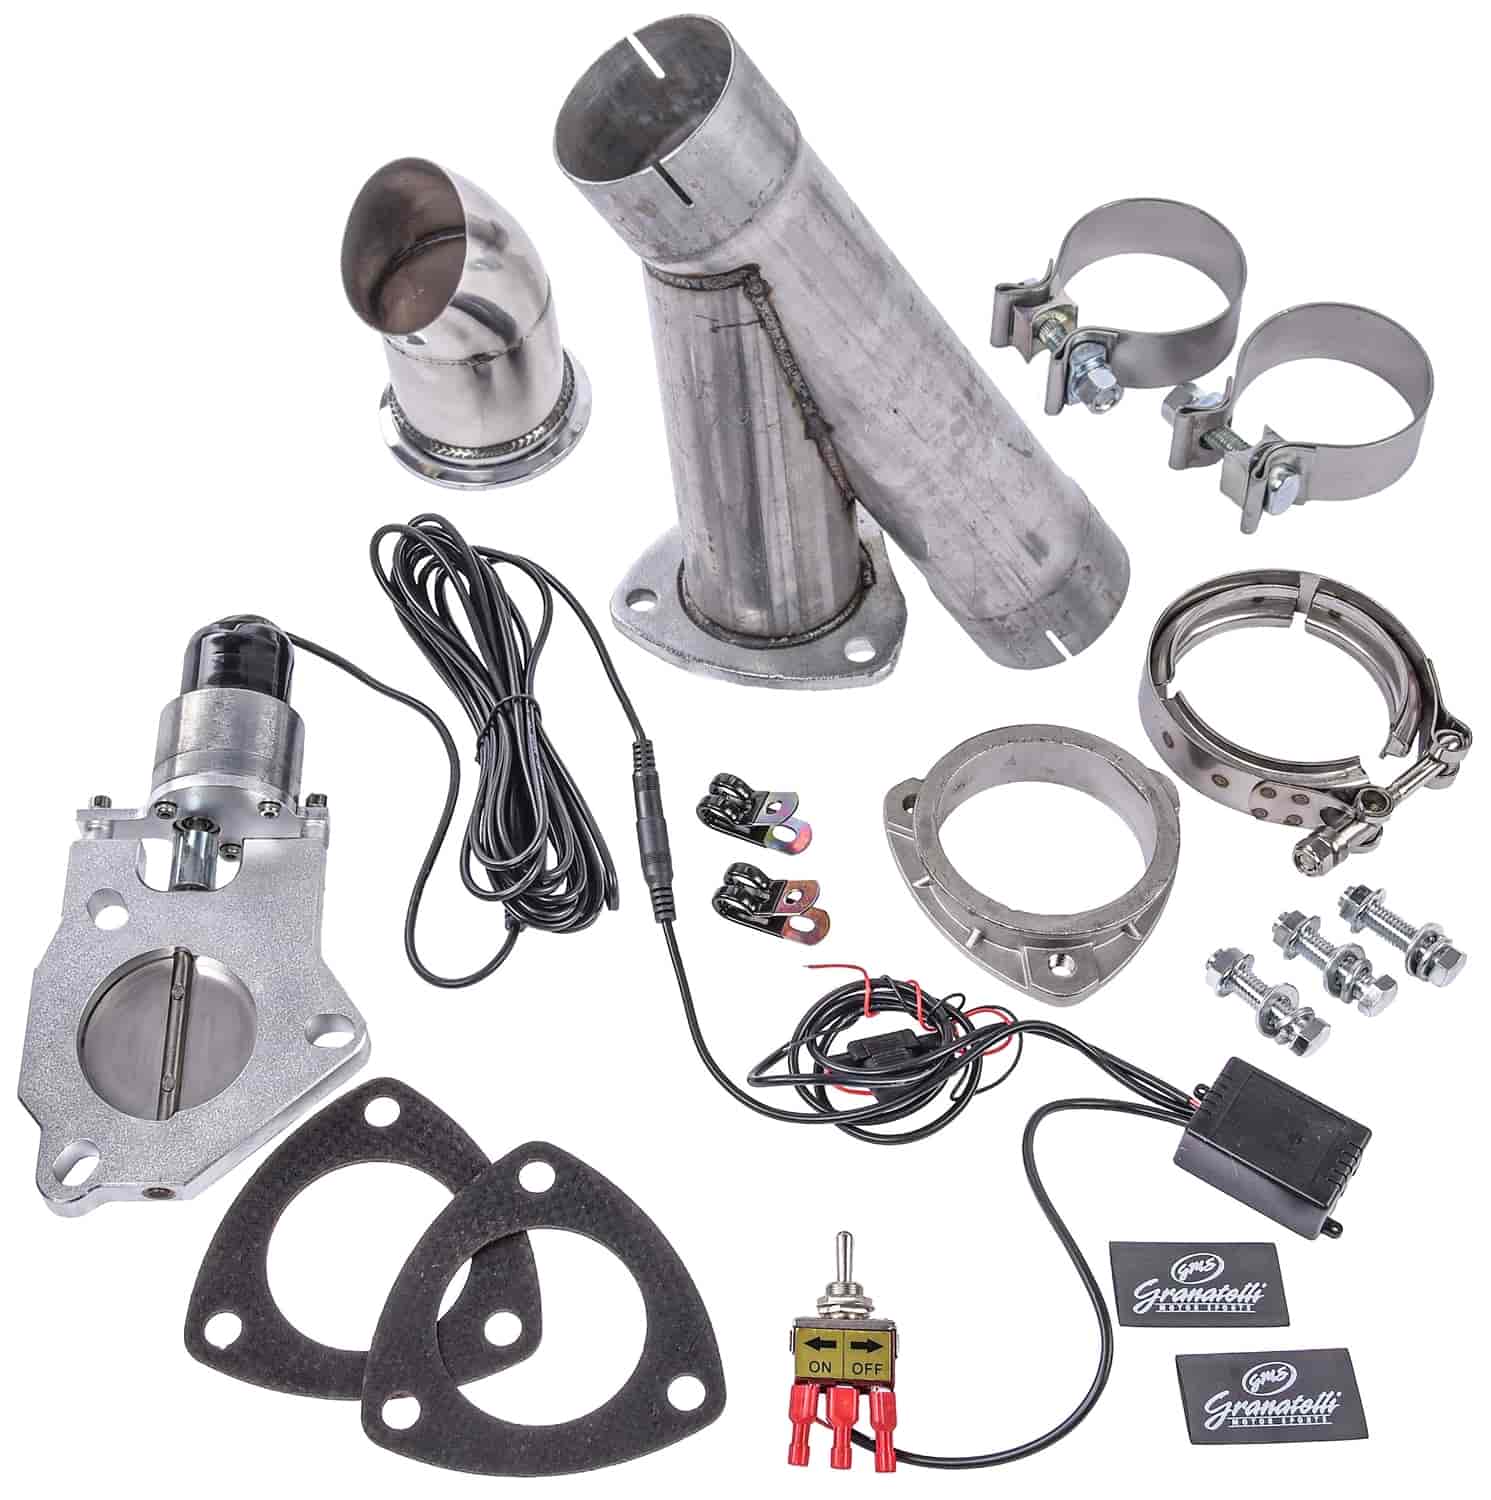 Electronic Aluminized Mild Steel Exhaust Cutout System for 2 1/4 in. Single Exhaust (Slip-Fit)